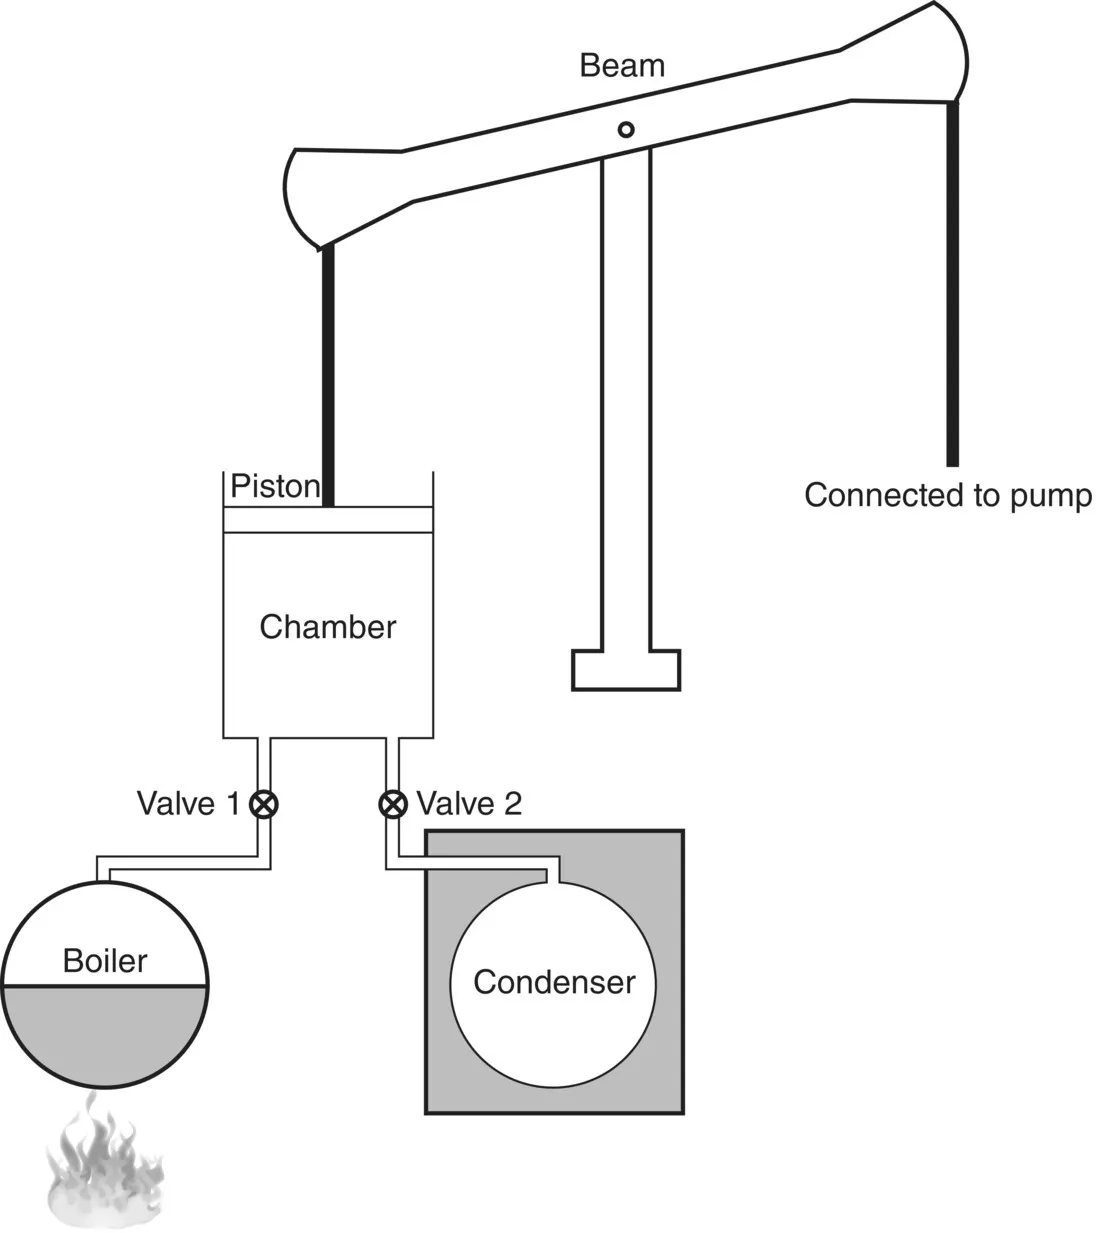 Schematic diagram of Watt’s engine with an external condenser displaying two valves, a boiler, a condenser, a chamber, pistons, and a beam.